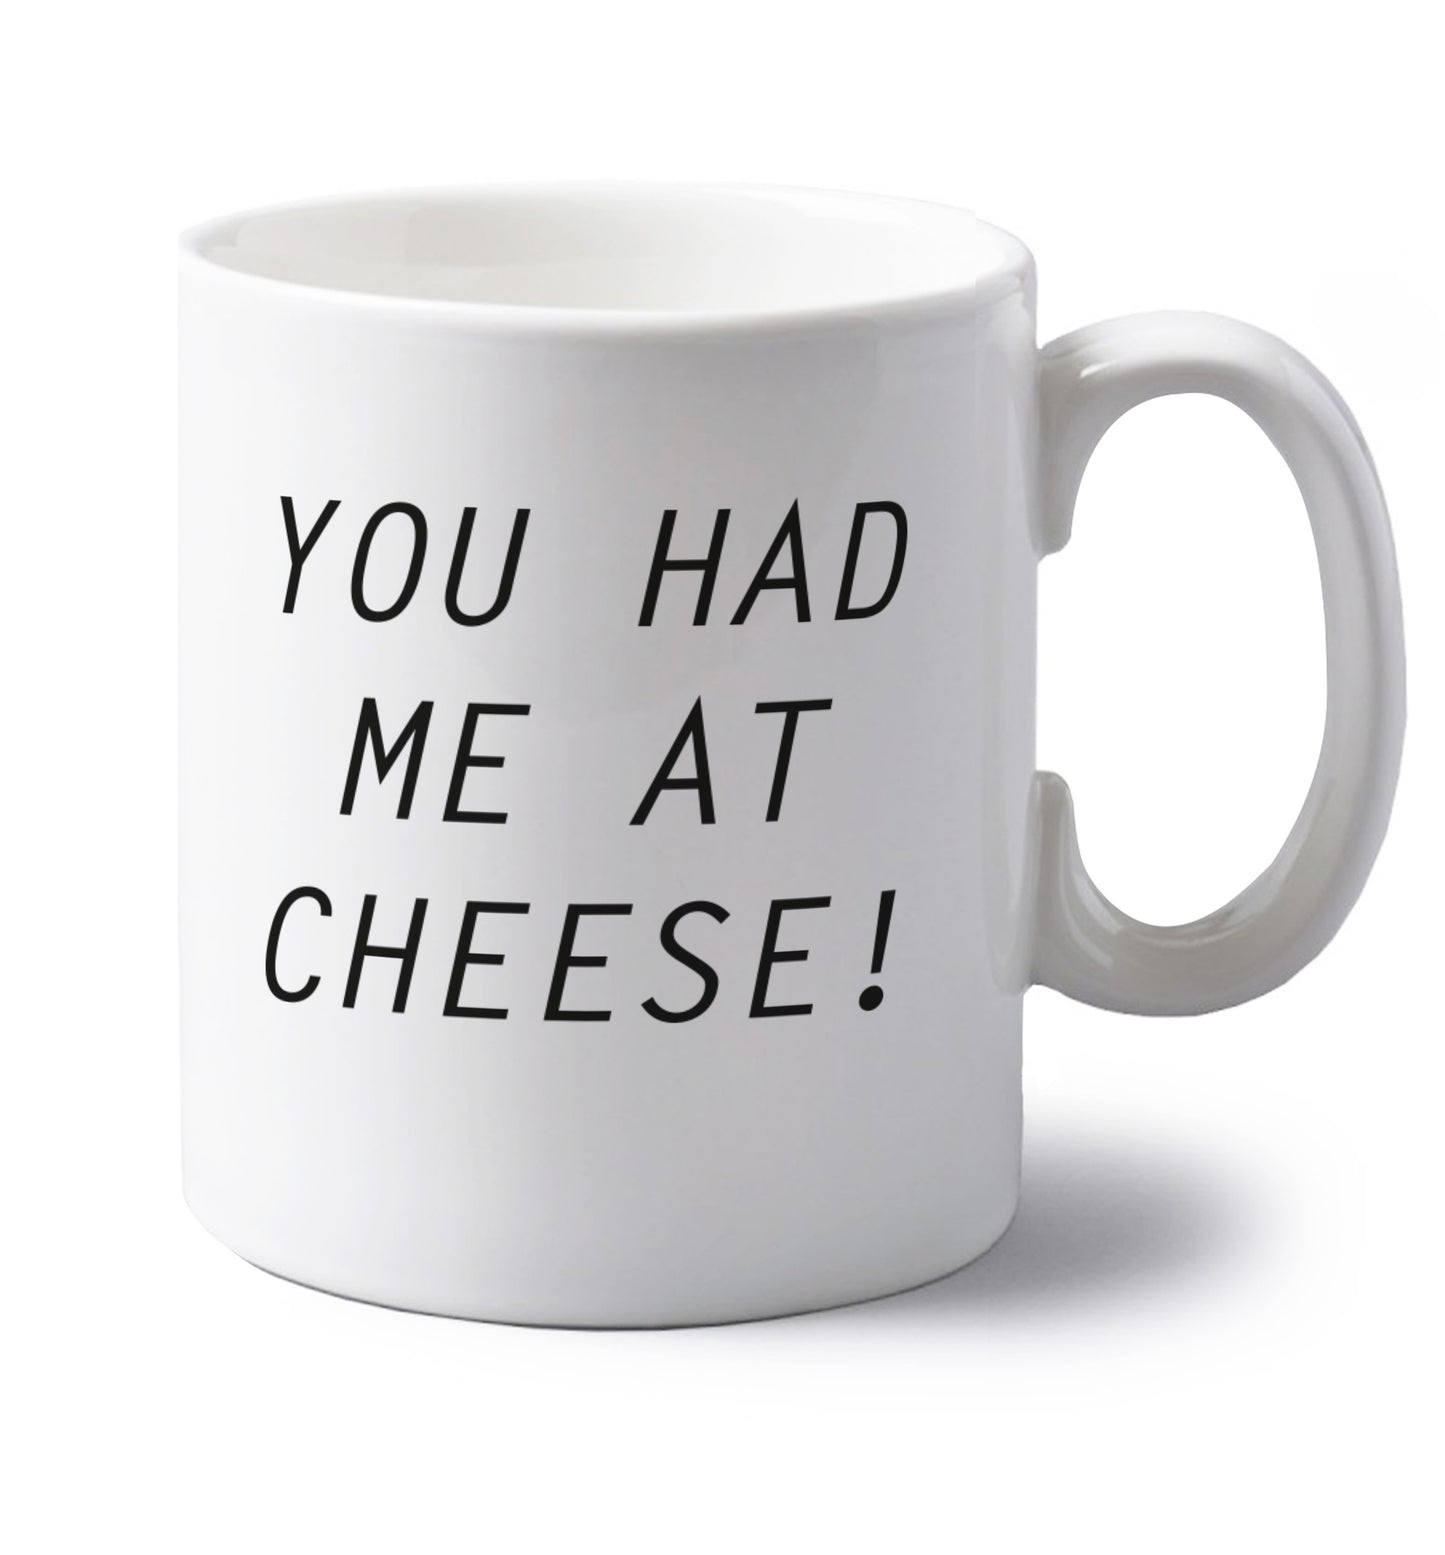 You had me at cheese left handed white ceramic mug 